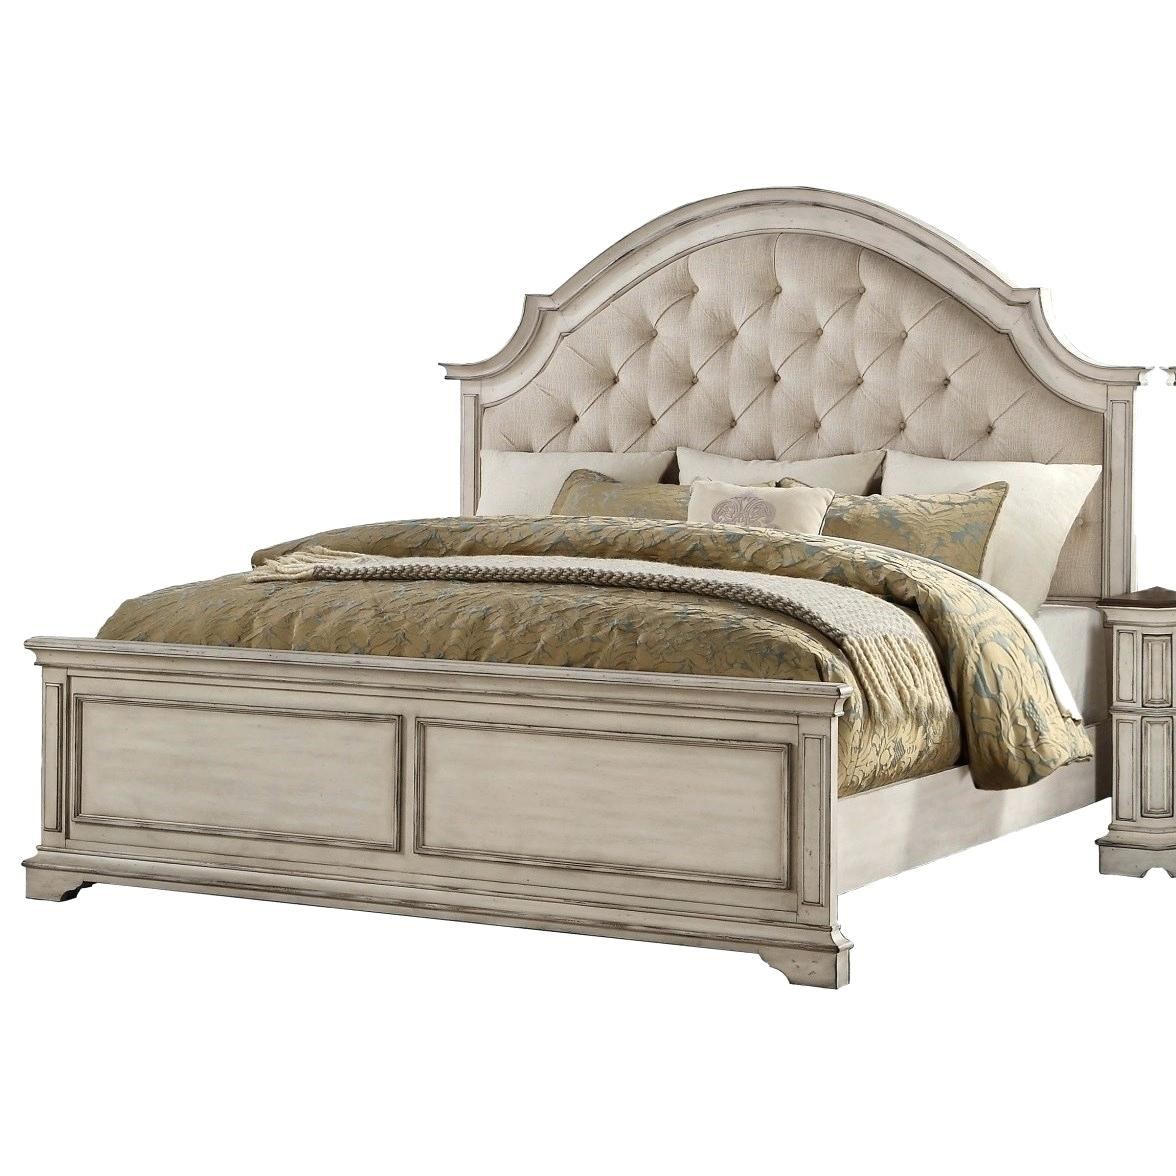 New classic designs luxury girls beds for children bedroom furniture with single 1